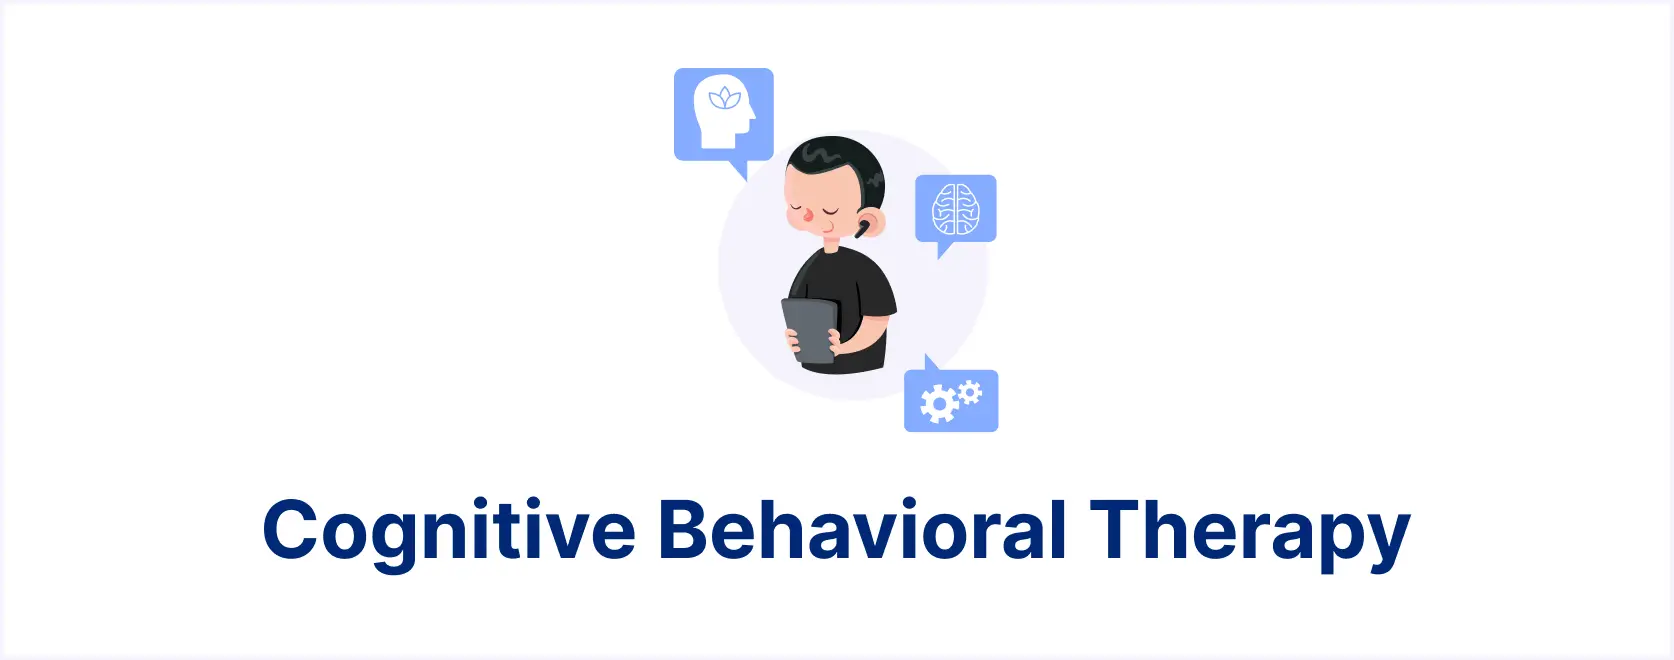 Cognitive Behavioral Therapy.webp